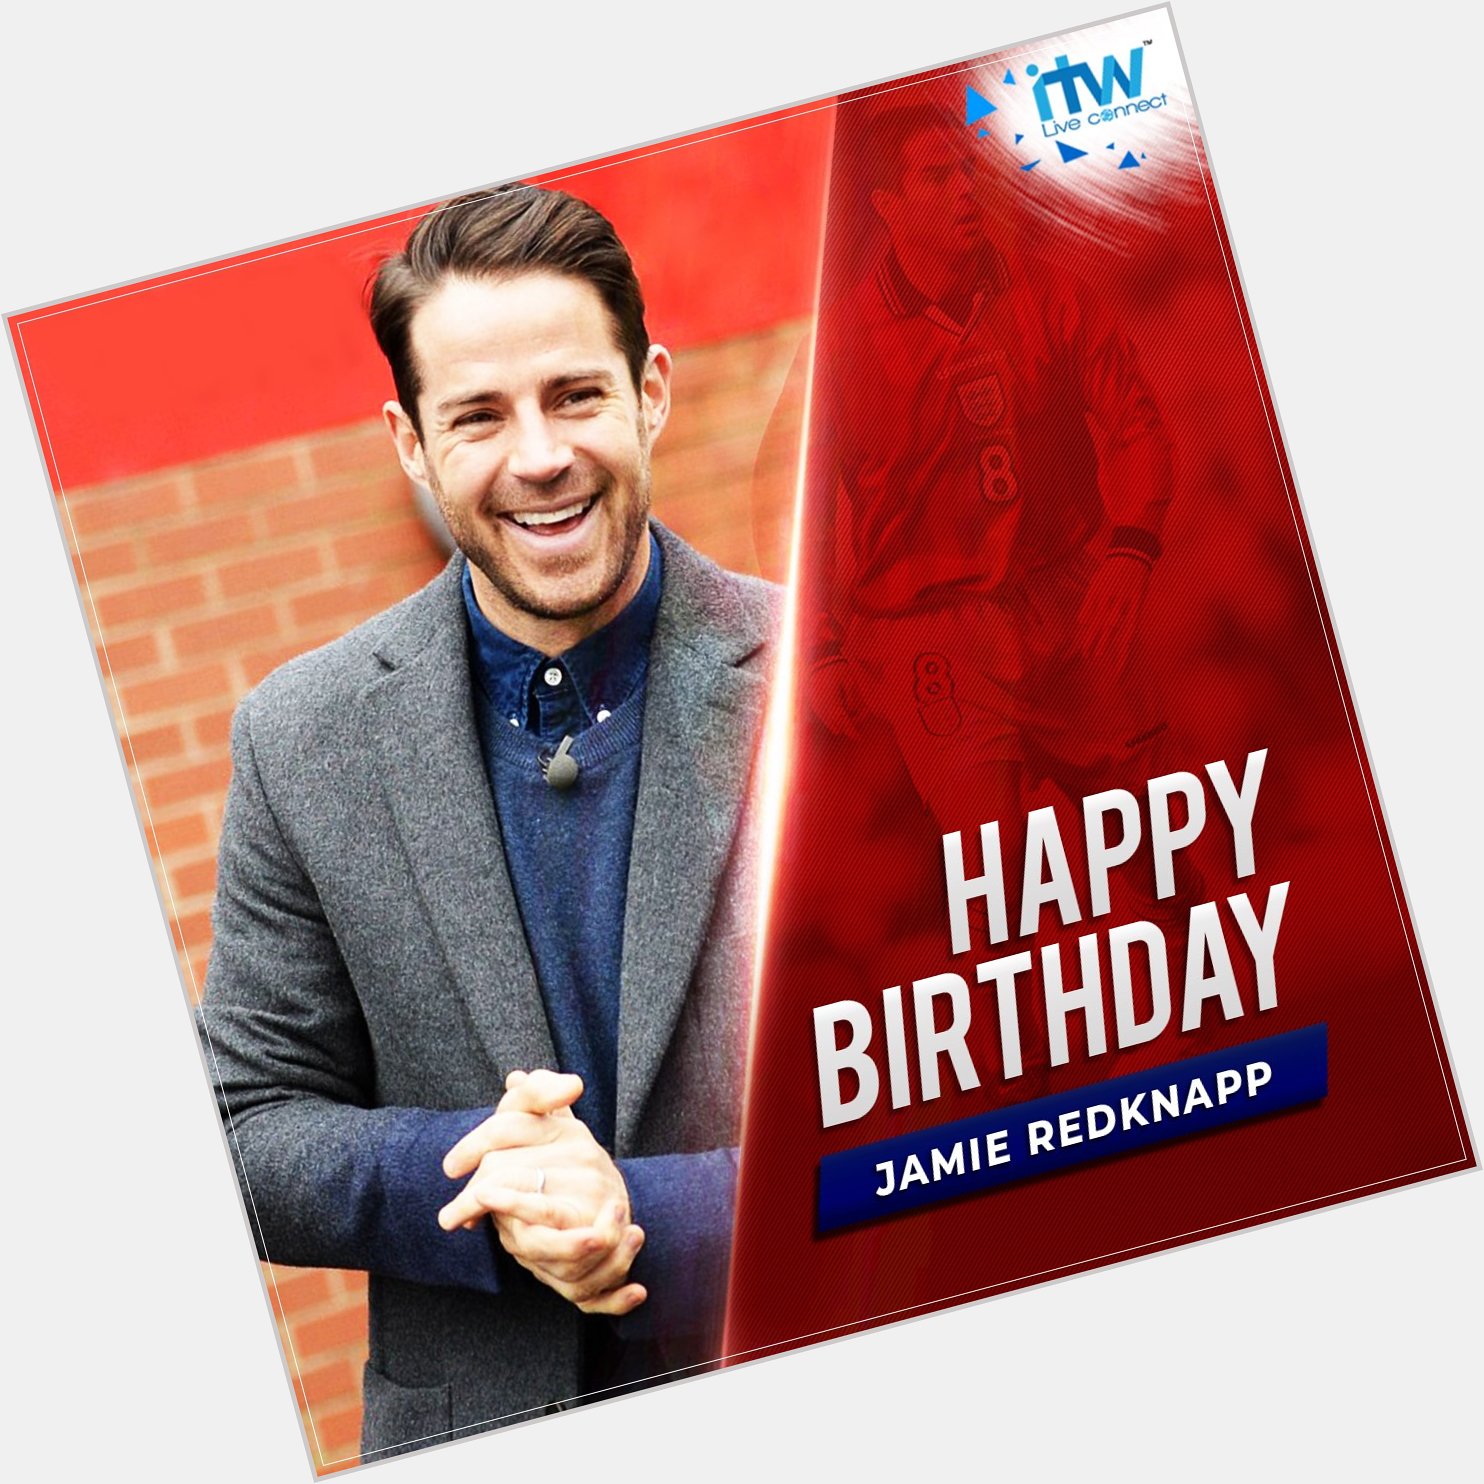 Wishing former and midfielder Jamie Redknapp a very Happy Birthday as he turns 44 today. 